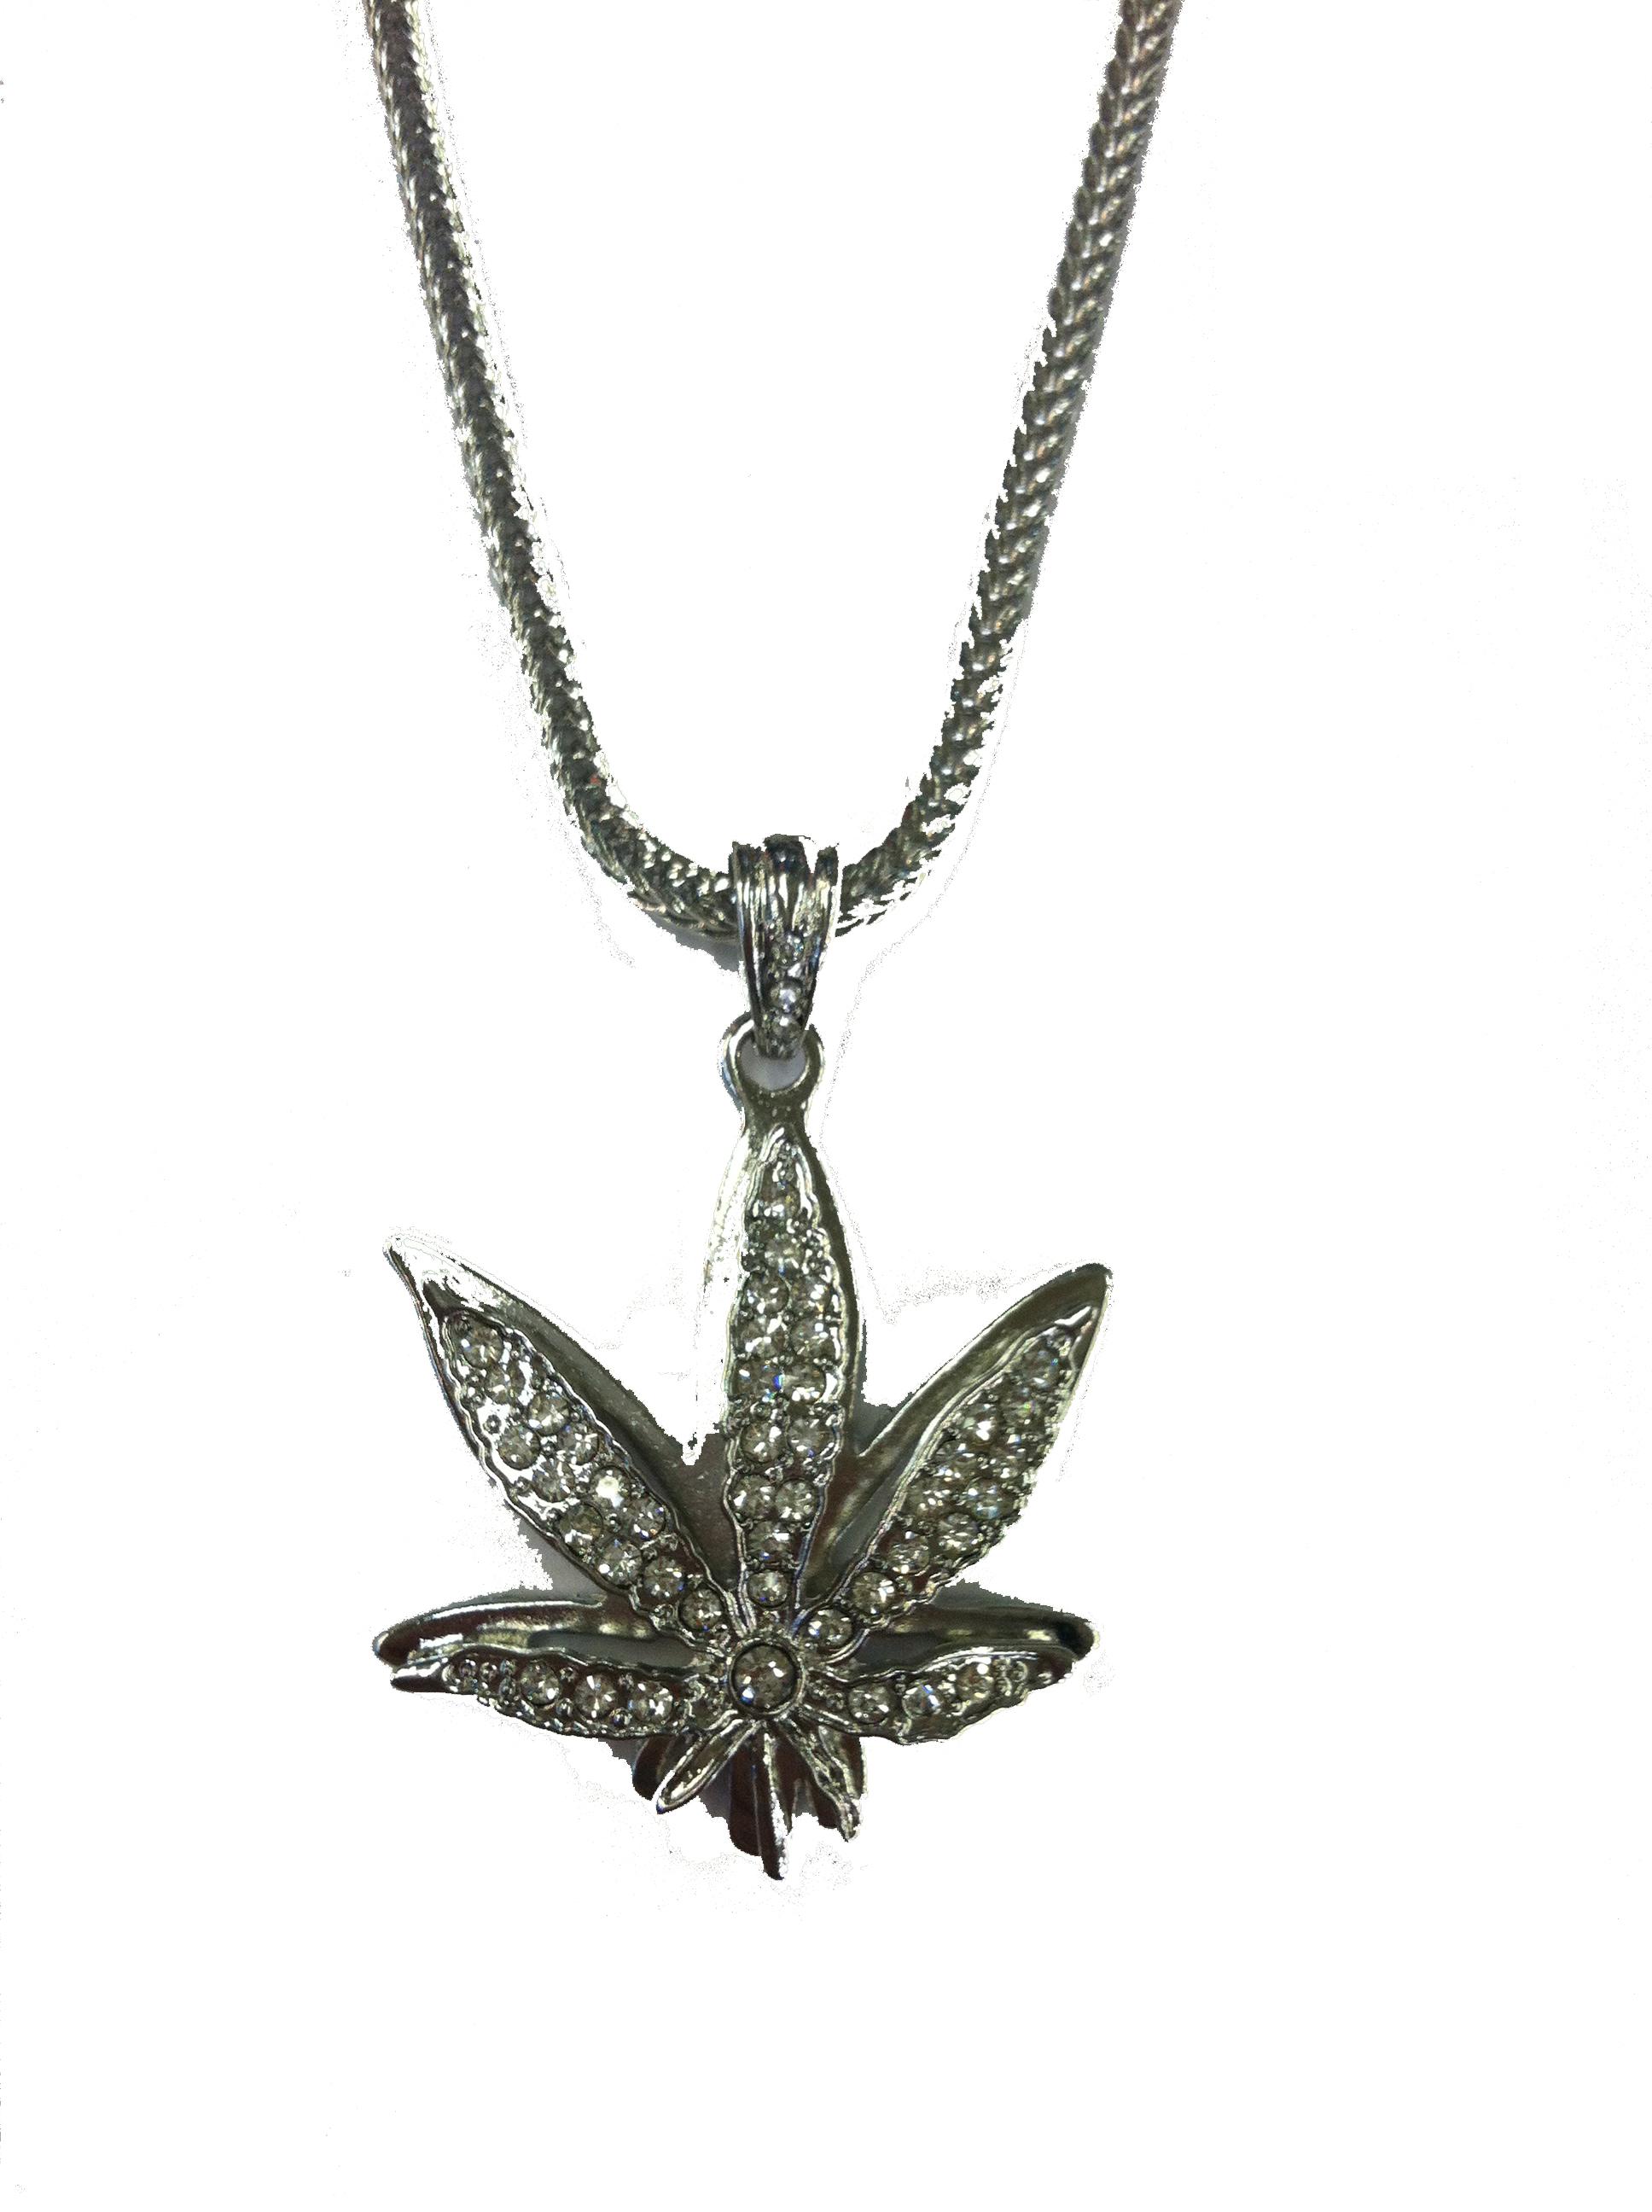 Weed Plant chain 3